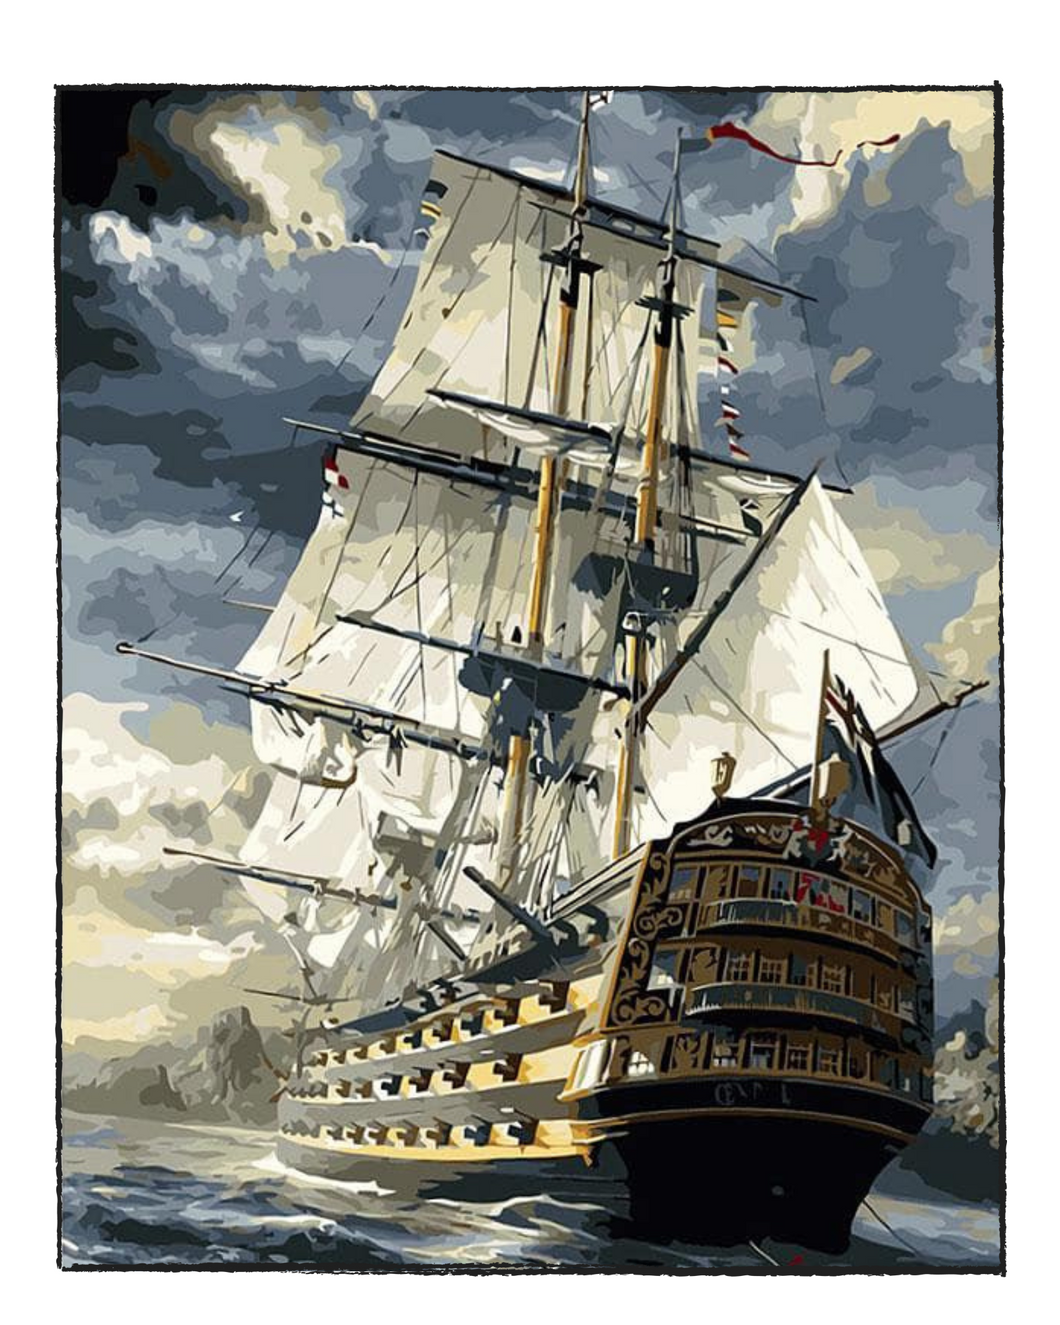 Ship at Stormy Sea - DIY Paint by Numbers